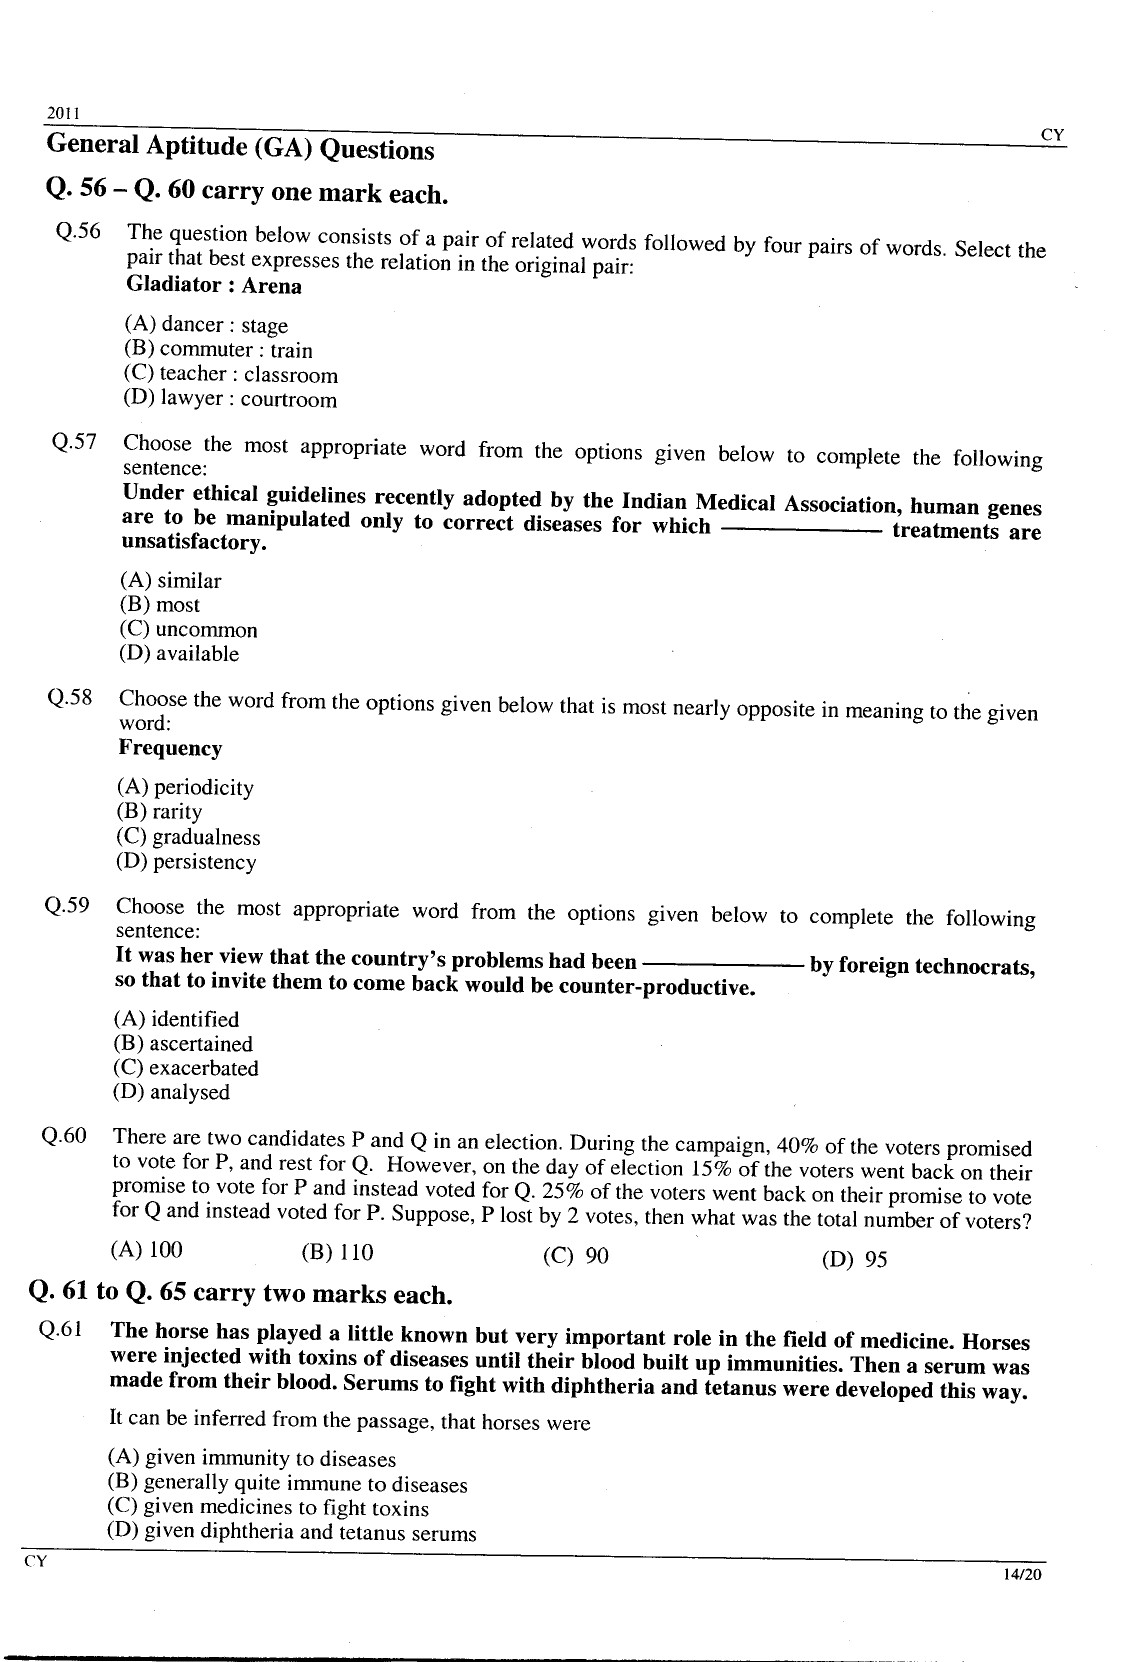 GATE Exam Question Paper 2011 Chemistry 14